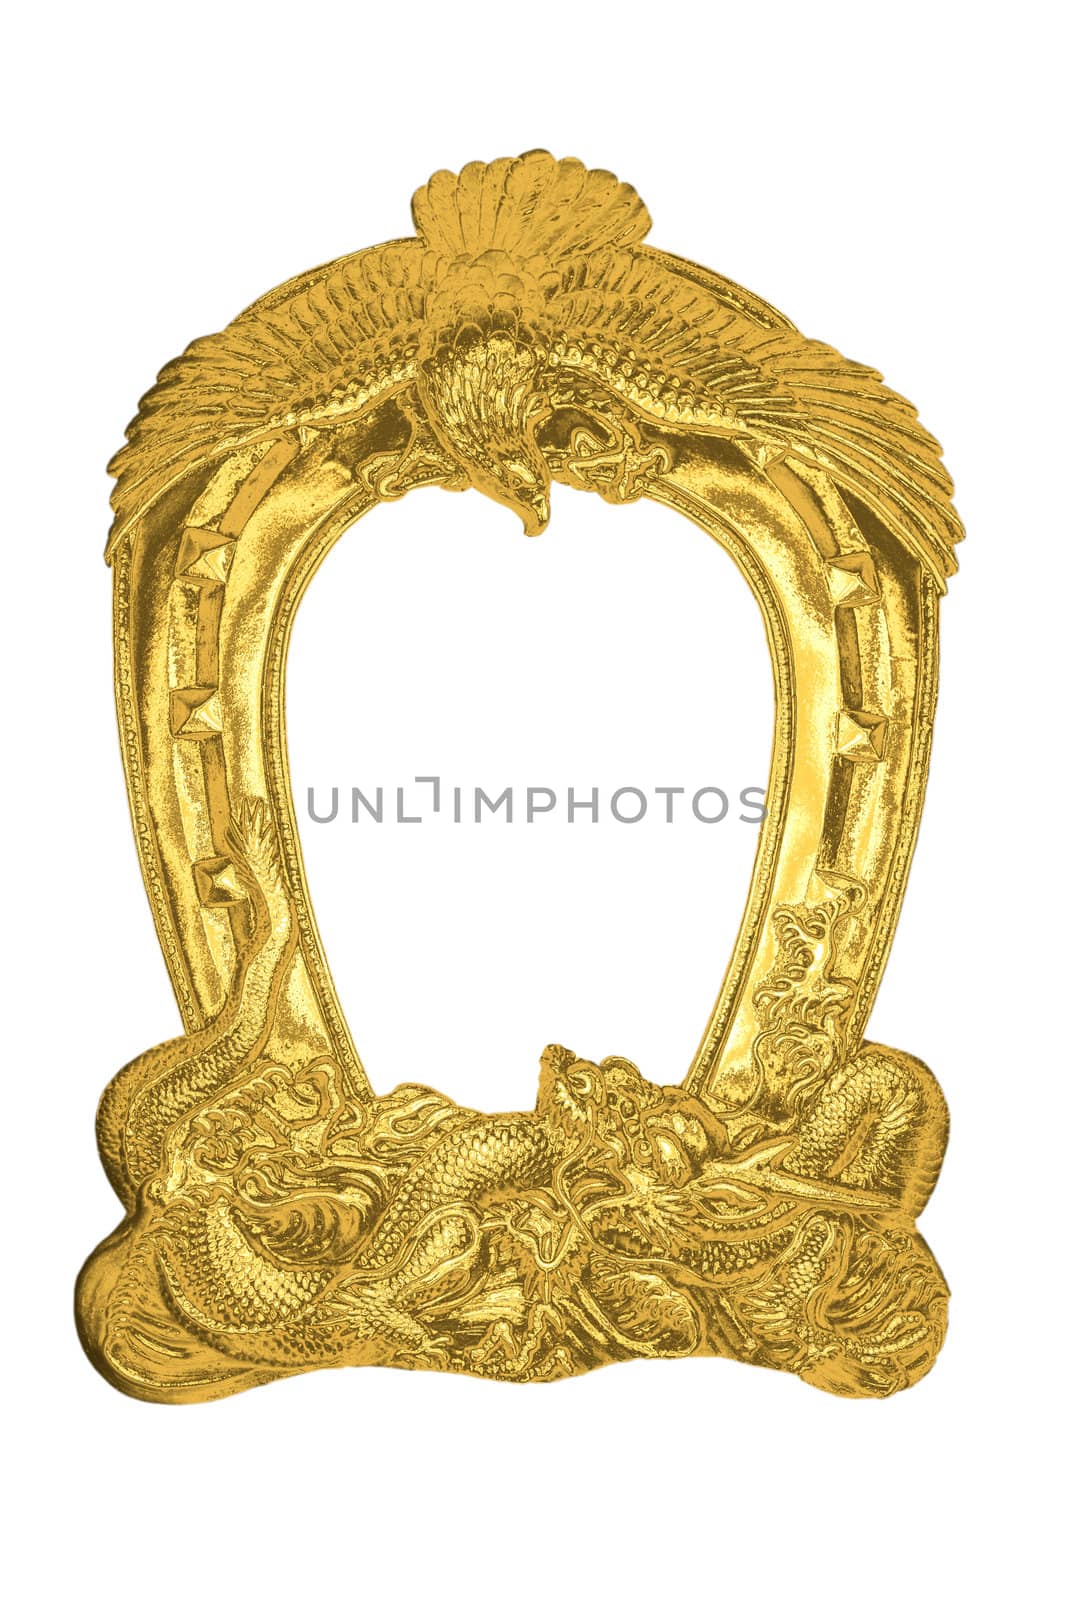 golden old antique photo frame isolated on white